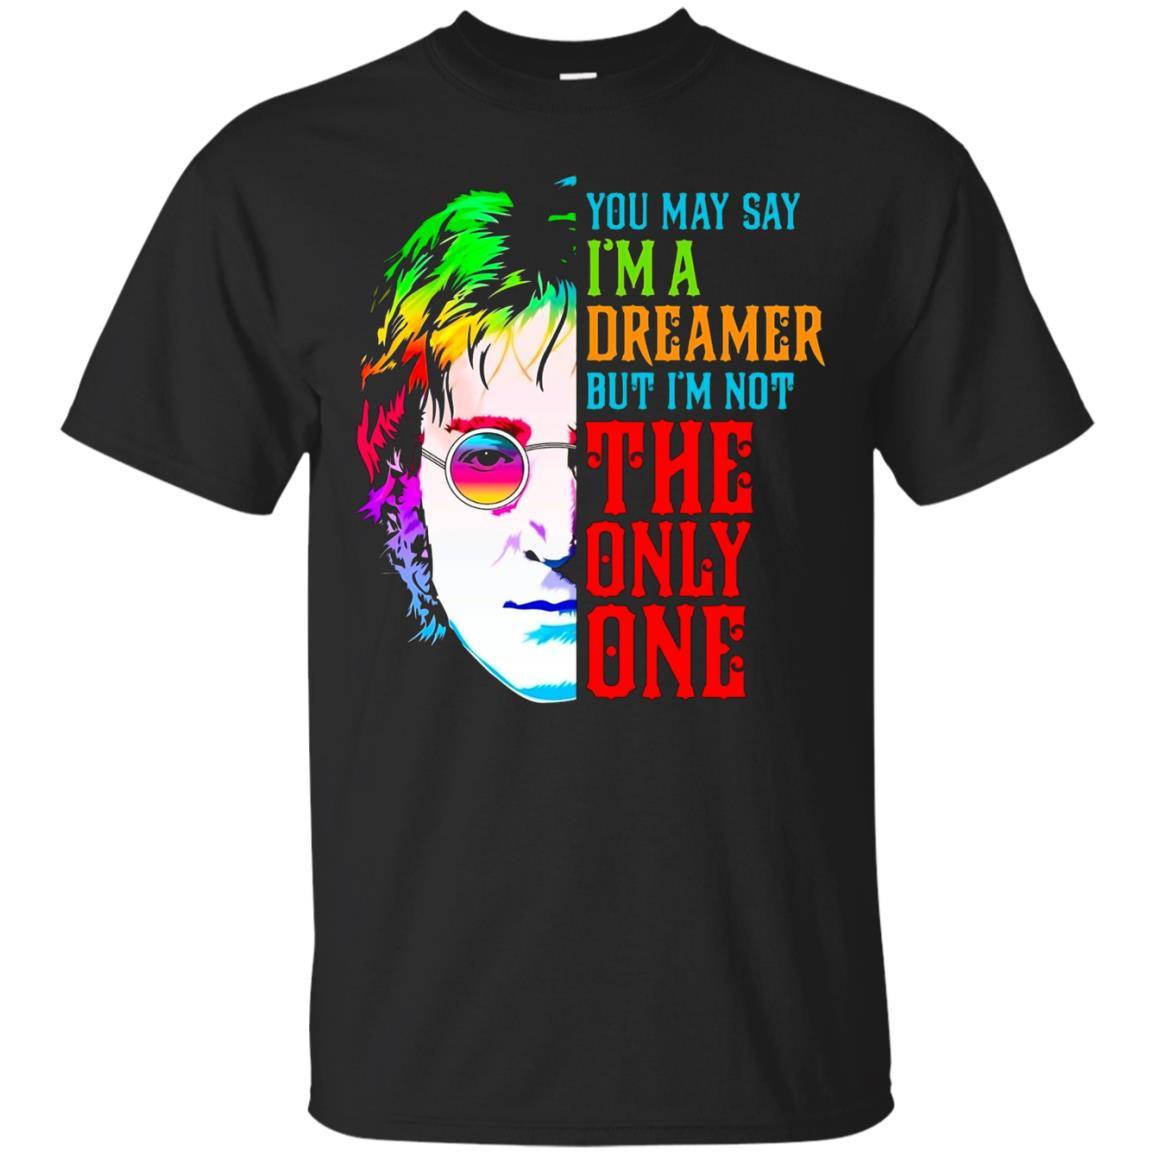 You May Say I'm Dreamer But I'm Not The Only One T-Shirt Black / 5XL